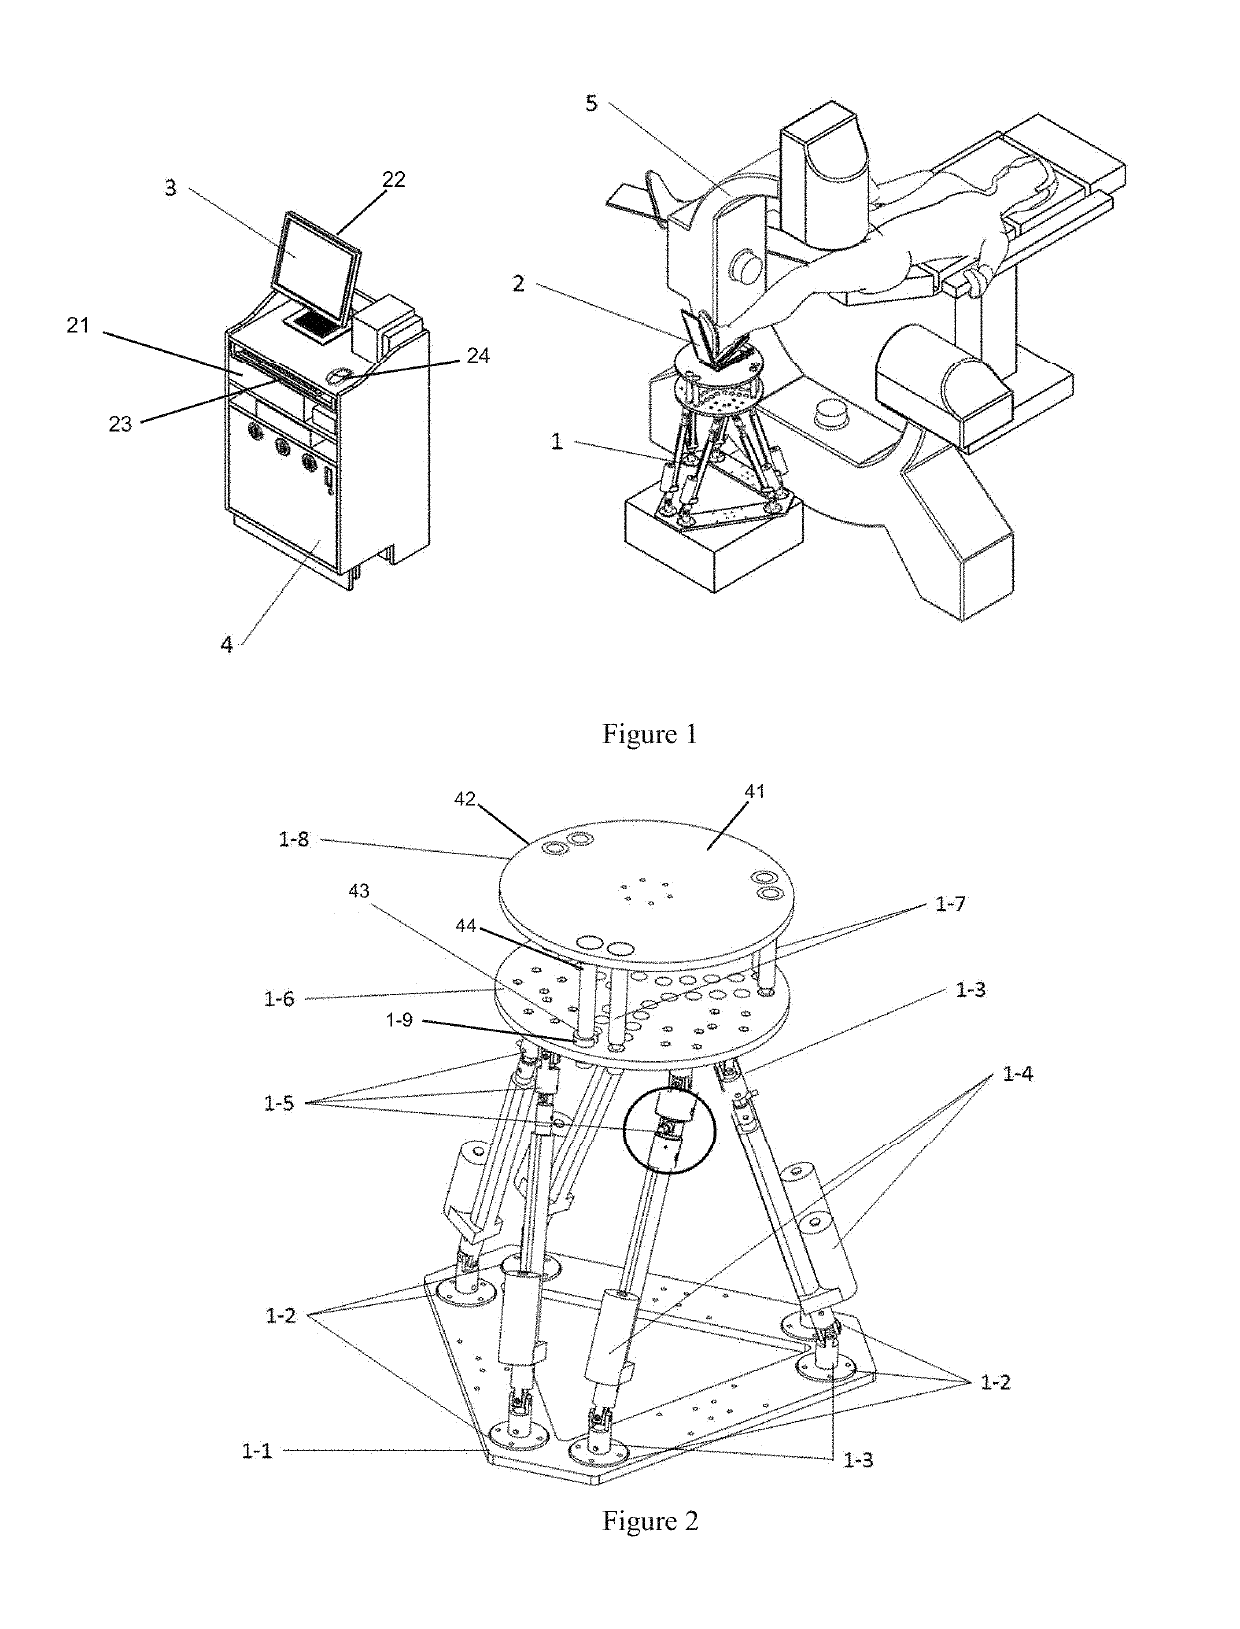 Remotely Operated Orthopedic Surgical Robot System for Fracture Reduction with Visual-servo Control Method